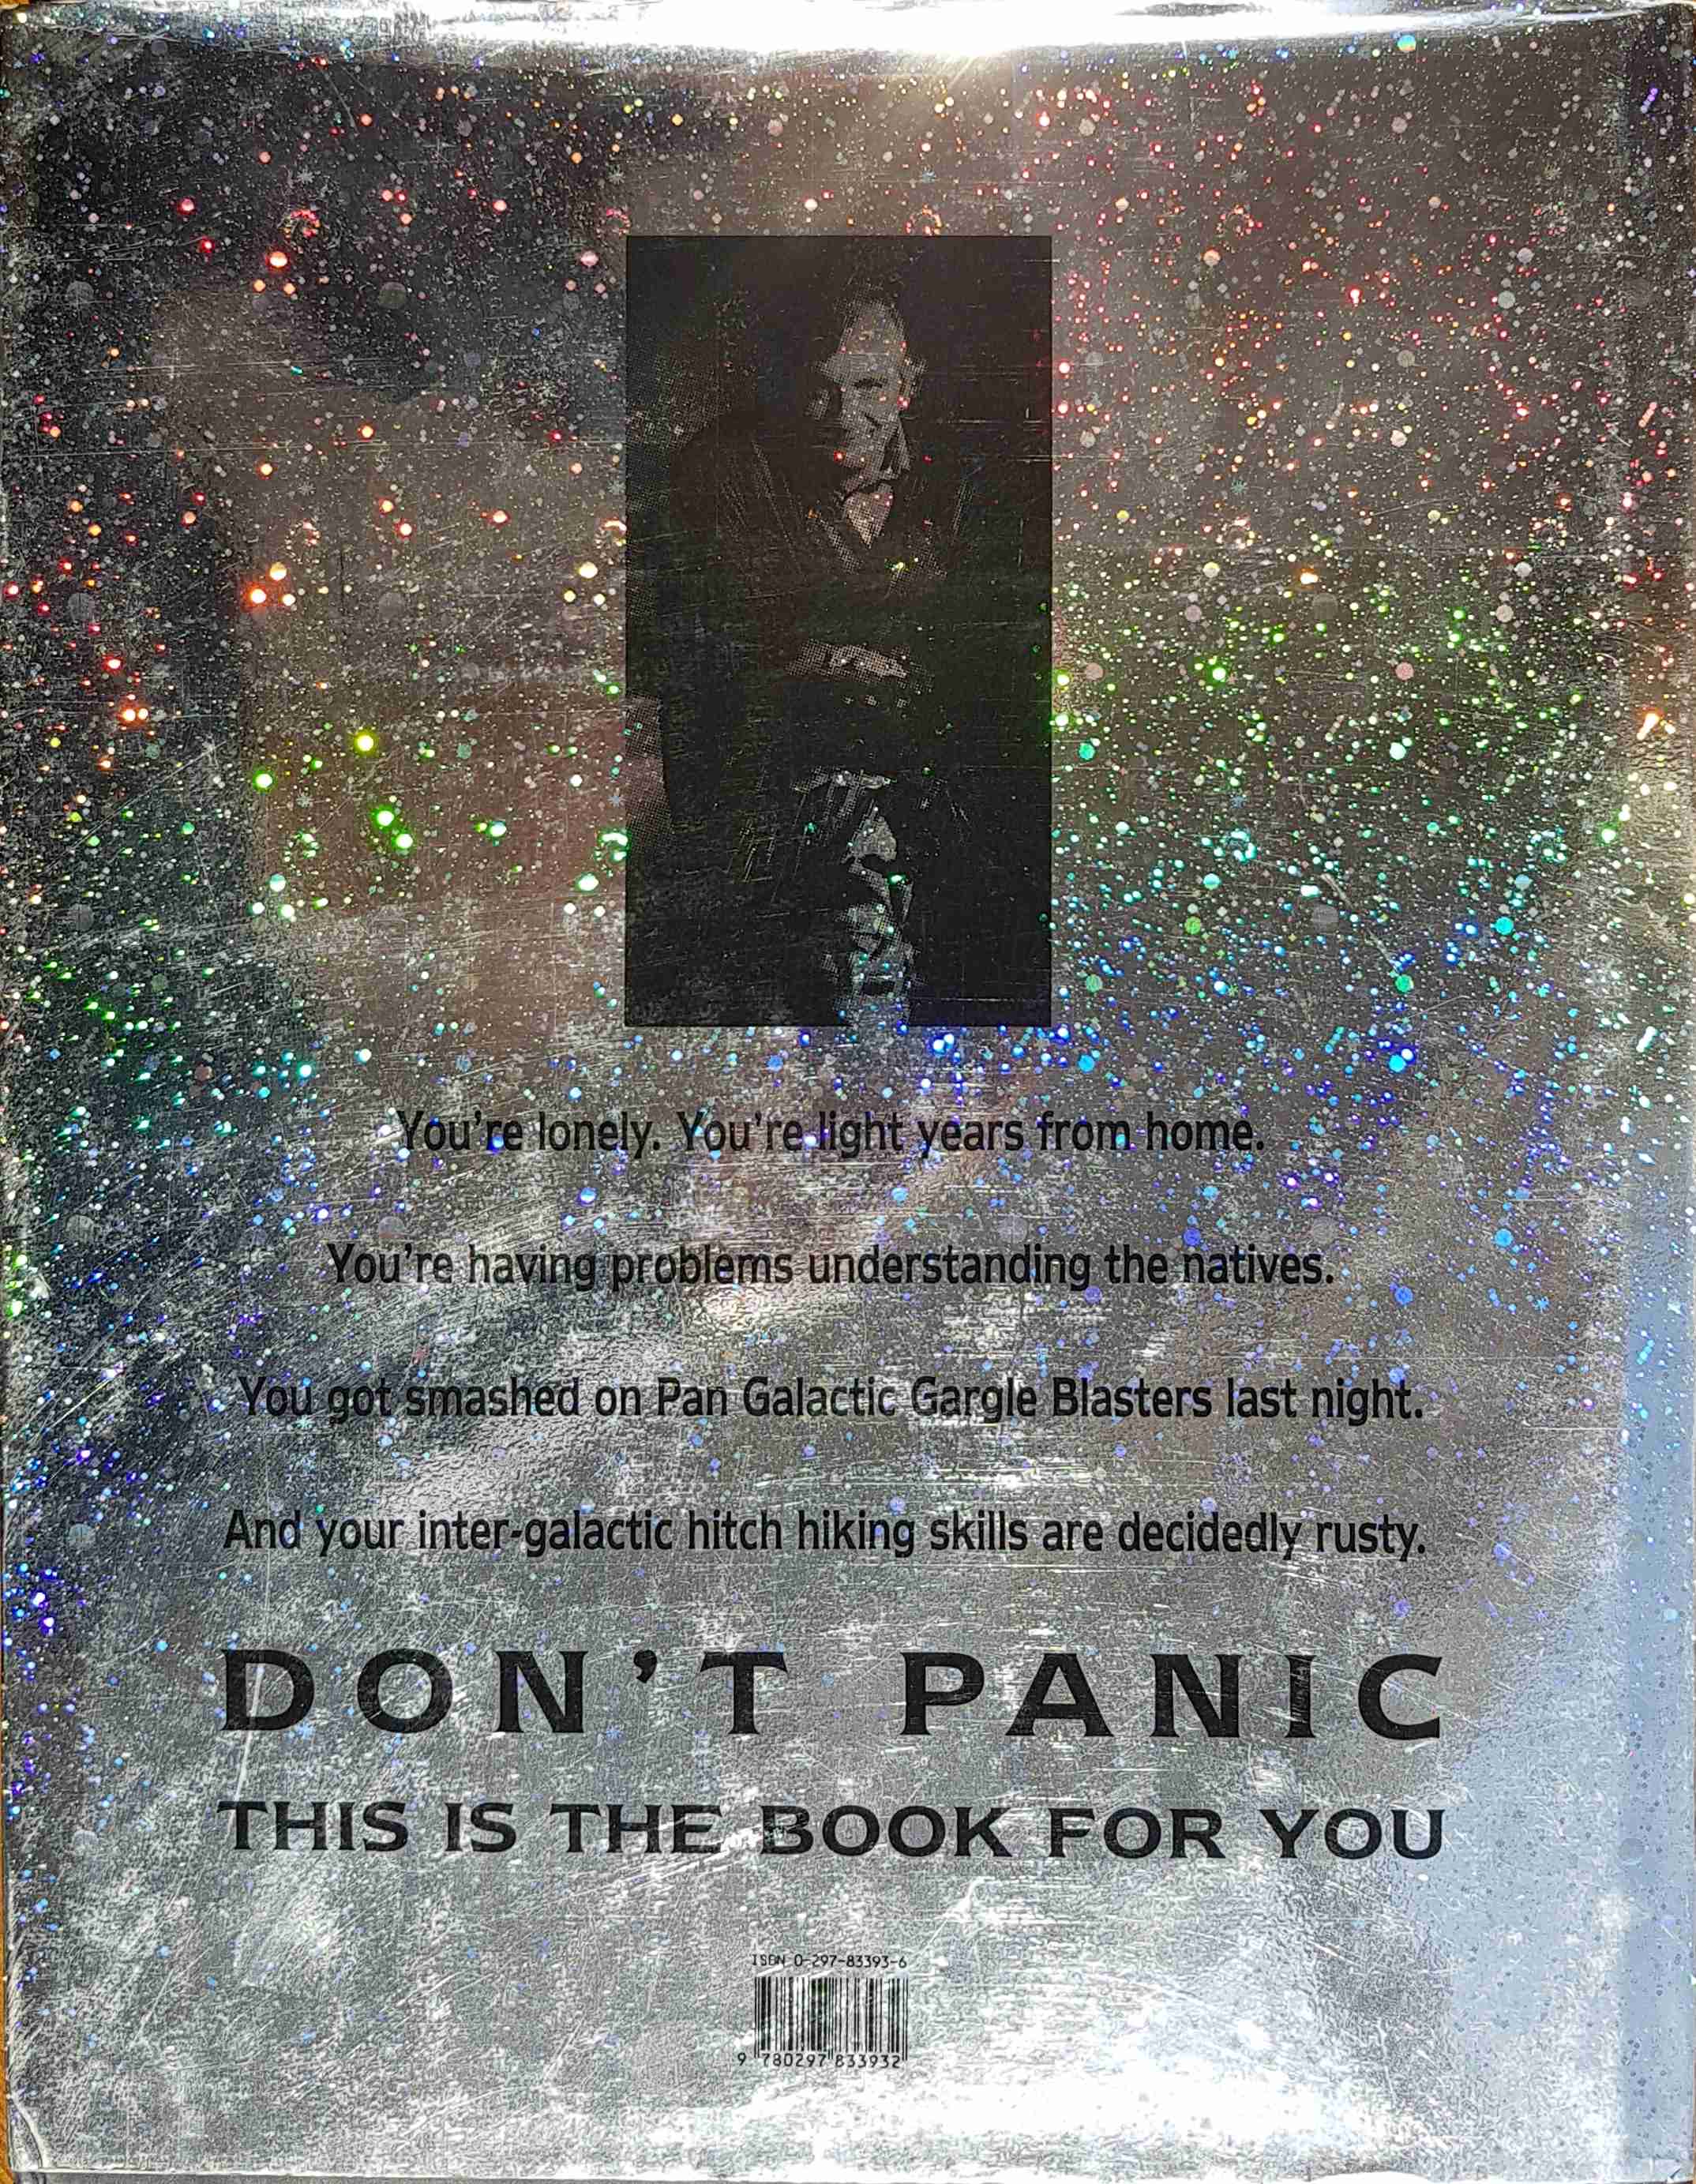 Picture of 0-297-83393-6 The illustrated hitch hiker's guide to the Galaxy by artist Douglas Adams from the BBC records and Tapes library